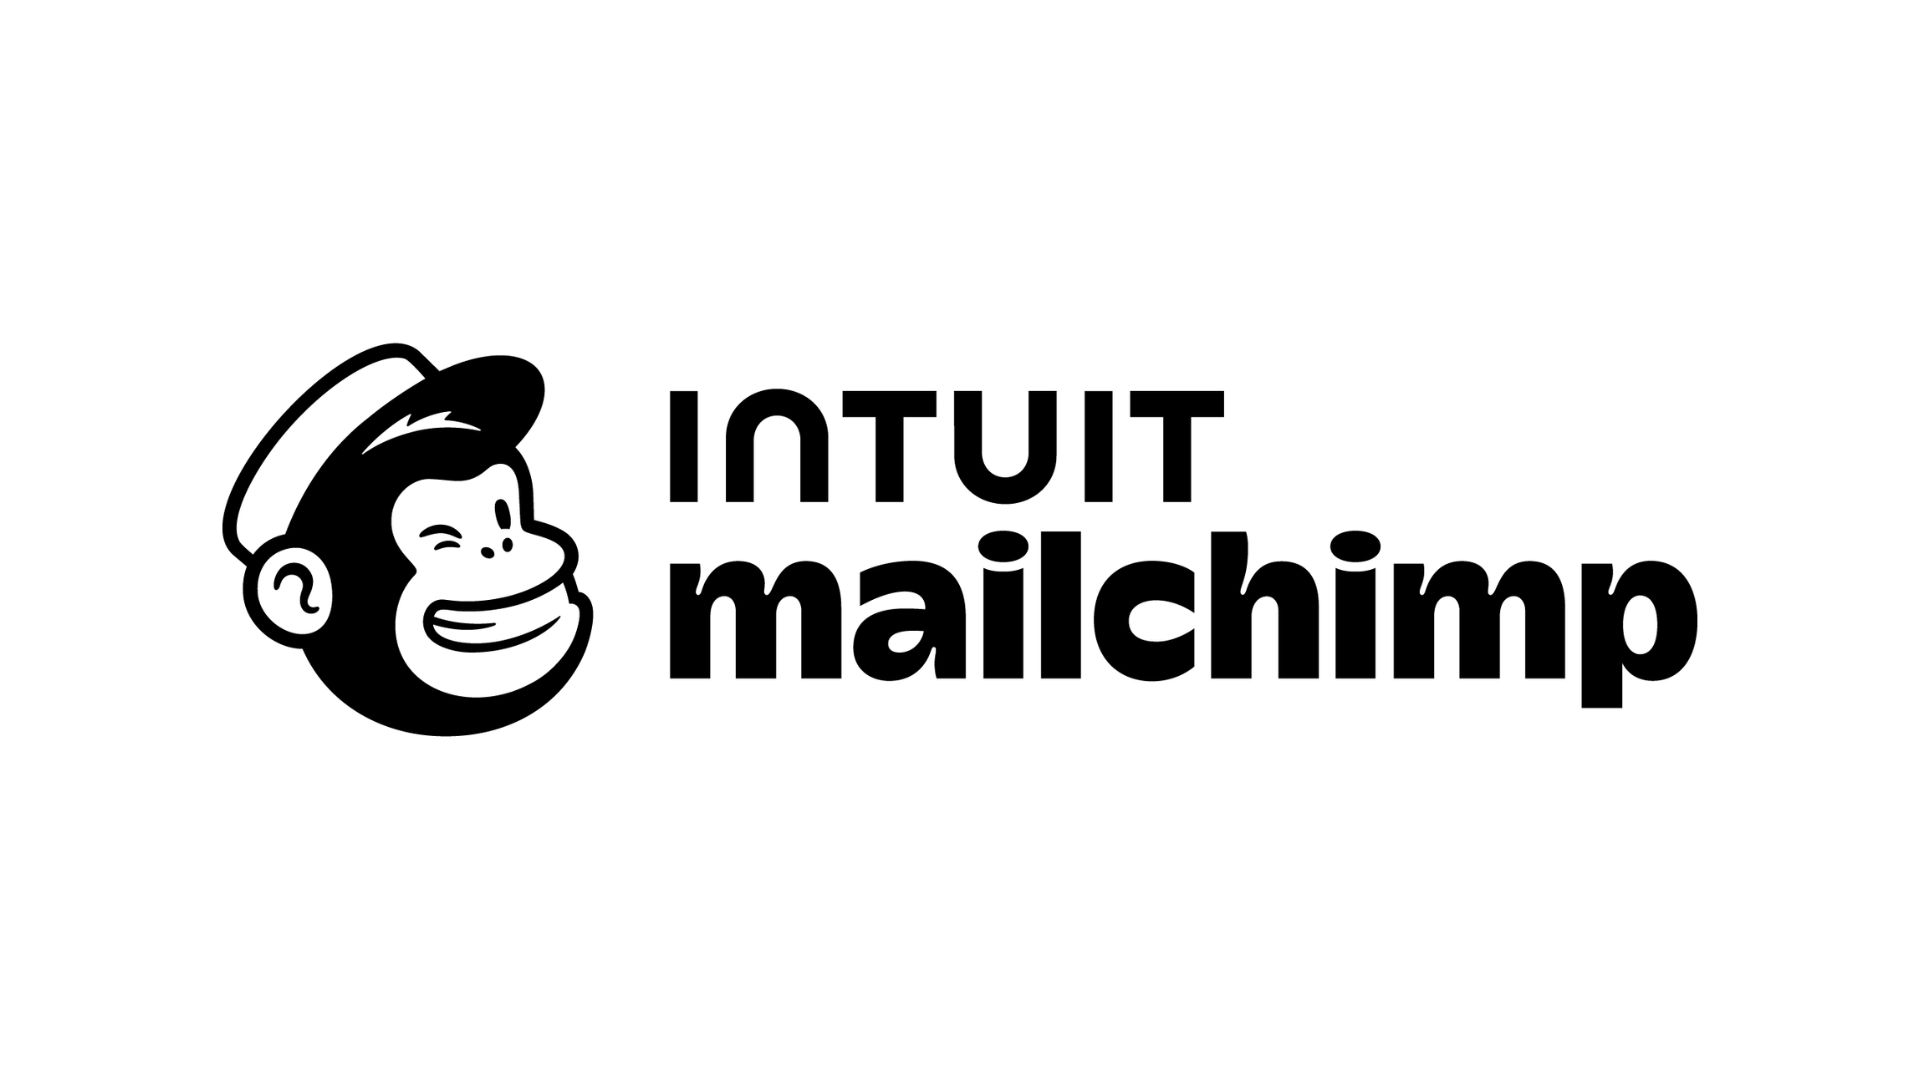 BRAND TRUST IN THE AGE OF INFORMATION OVERLOAD: INTUIT MAILCHIMP’S NEW STUDY REVEALS HOW BRANDS CAN BUILD TRUST AND CONNECT WITH CONSCIOUS CONSUMERS